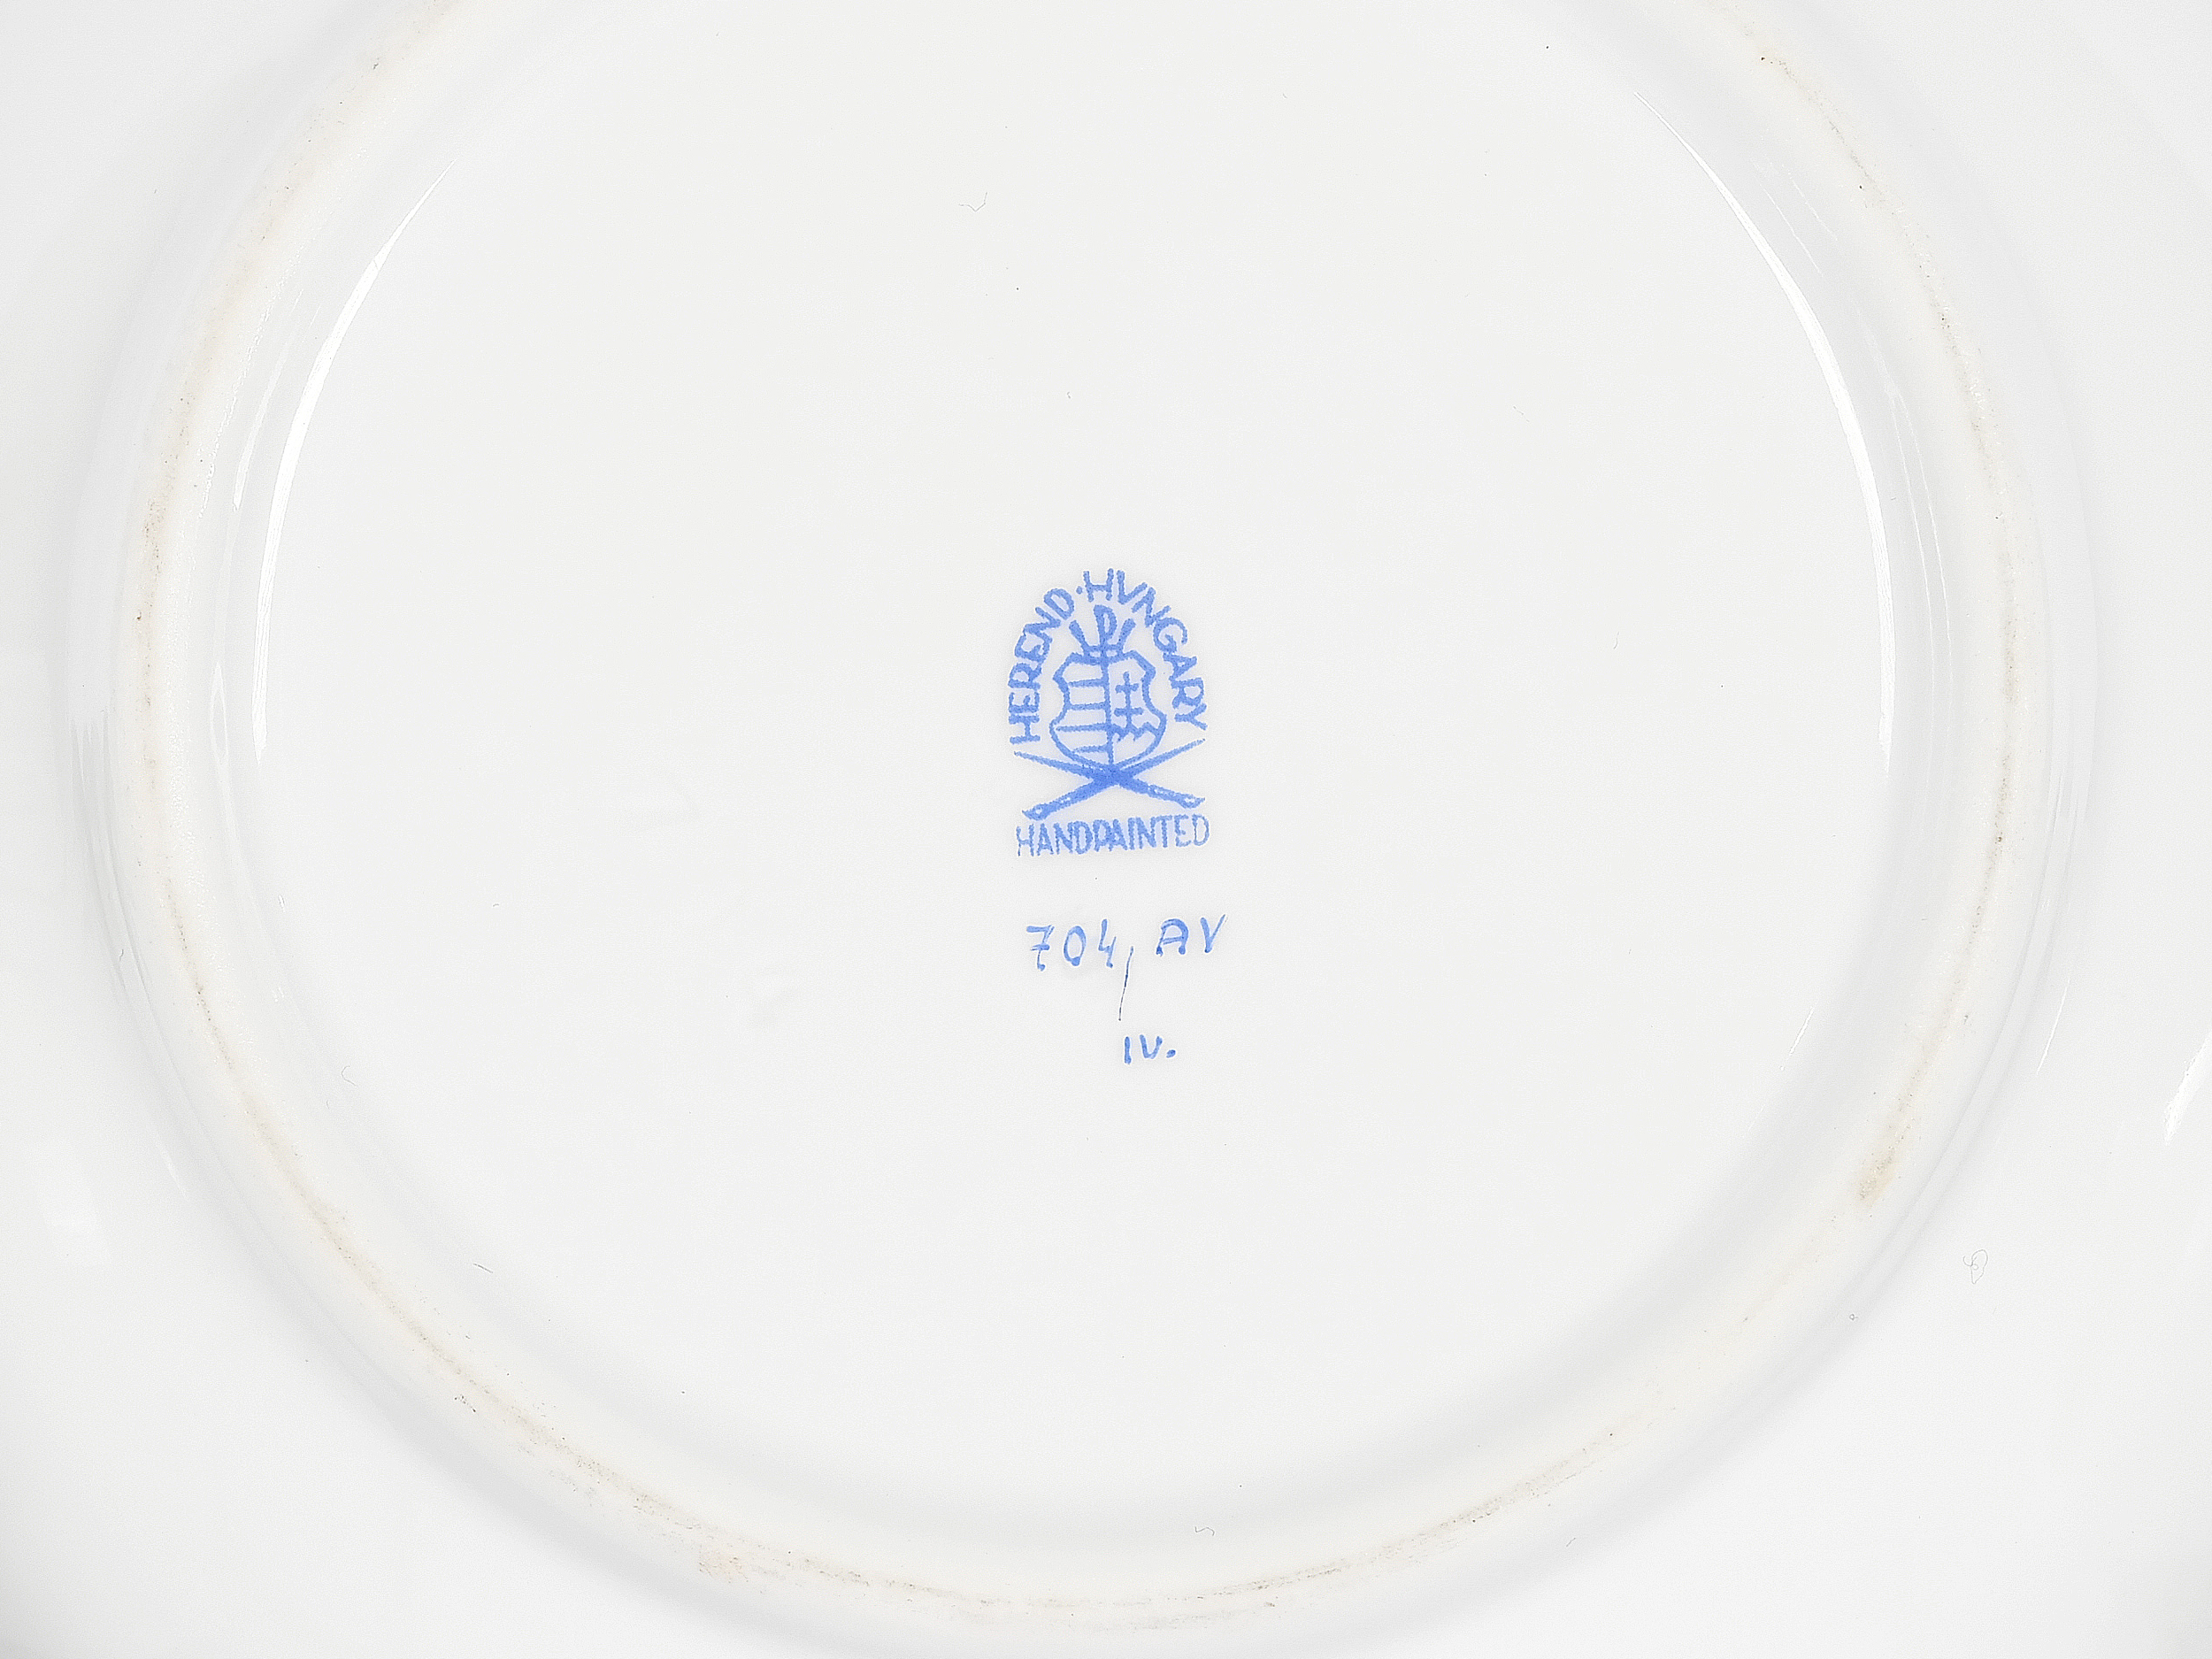 Large dinner service, 53 piece, Herend, Apponyi Vert - Image 6 of 6